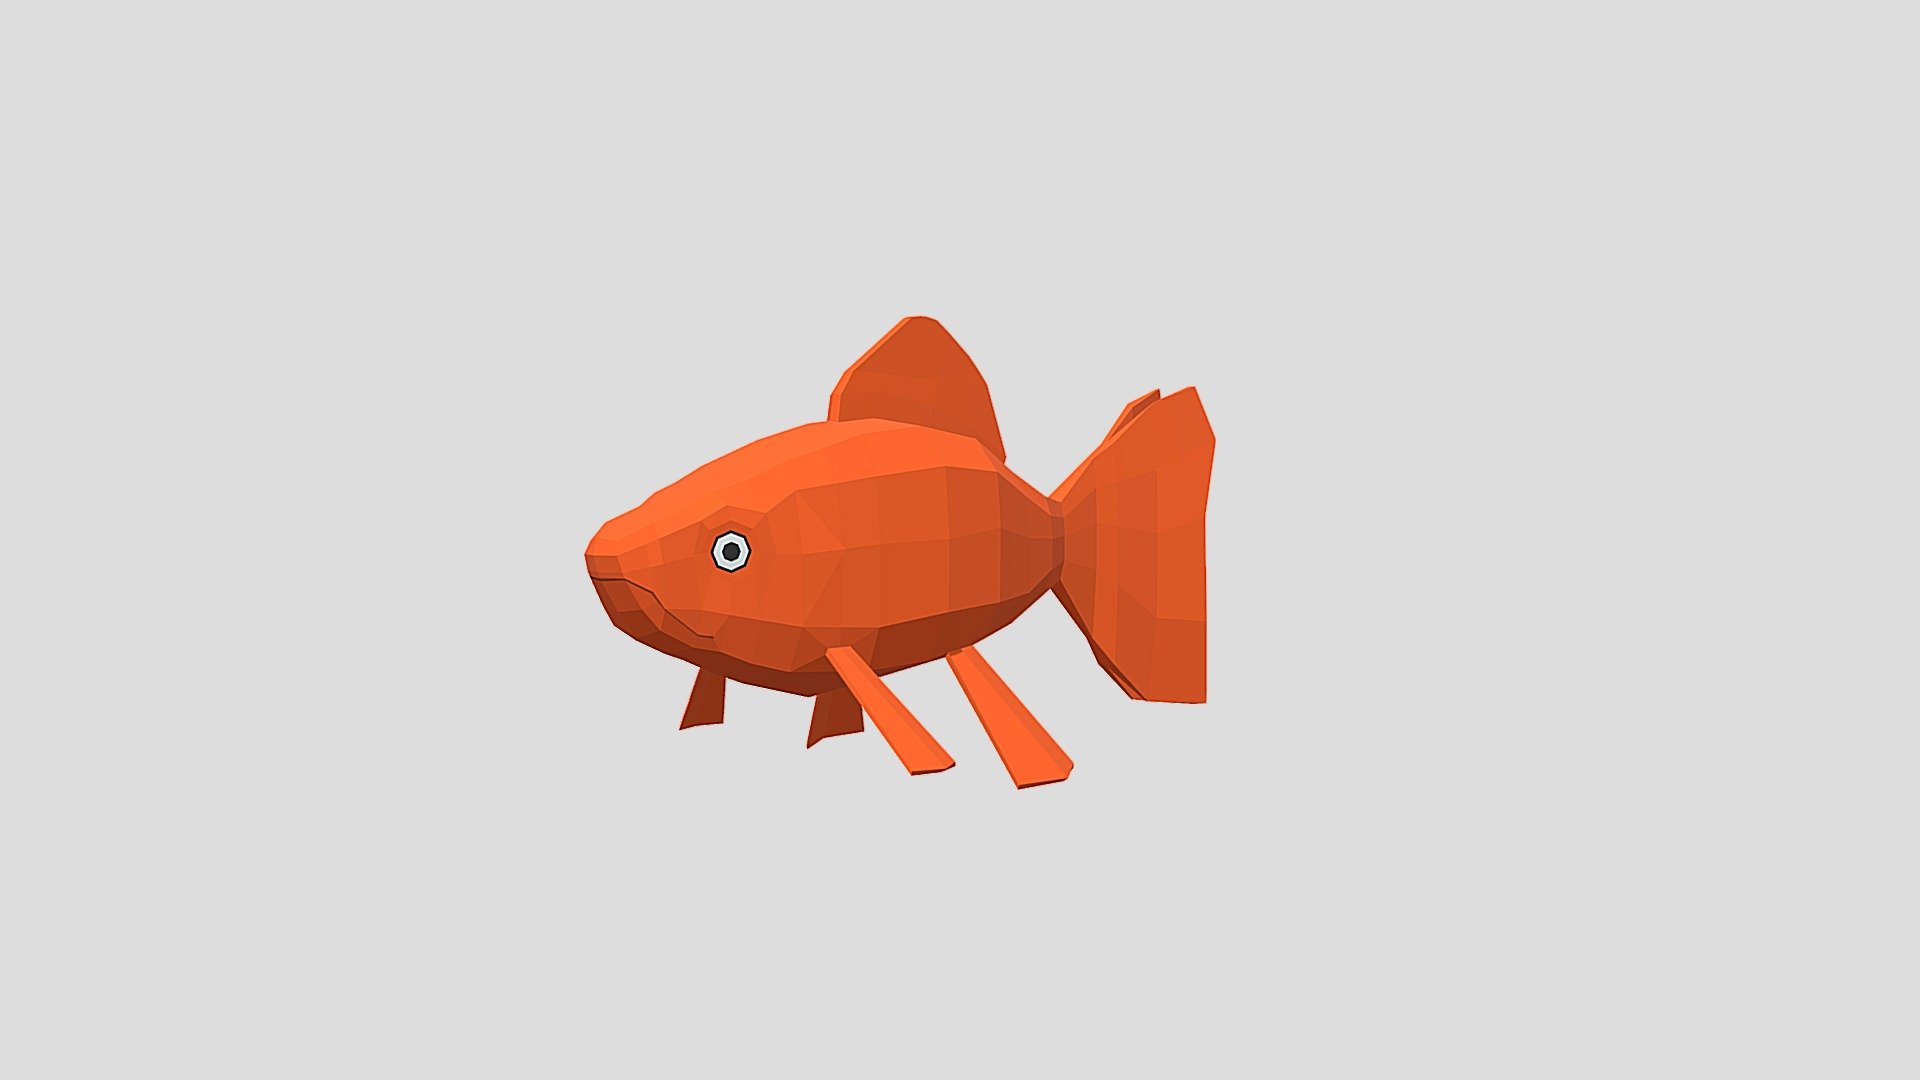 This is a low poly 3D model of a goldfish. The low poly fish was modeled and prepared for low-poly style renderings, background, general CG visualization presented as a mesh with quads/tris.

Verts : 447 Faces: 452

The 3D model have simple materials with diffuse colors.

No ring, maps and no UVW mapping is available.

The original file was created in blender. You will receive a 3DS, OBJ, FBX, blend, DAE, Stl.

All preview images were rendered with Blender Cycles. Product is ready to render out-of-the-box. Please note that the lights, cameras, and background is only included in the .blend file. The model is clean and alone in the other provided files, centered at origin and has real-world scale 3d model